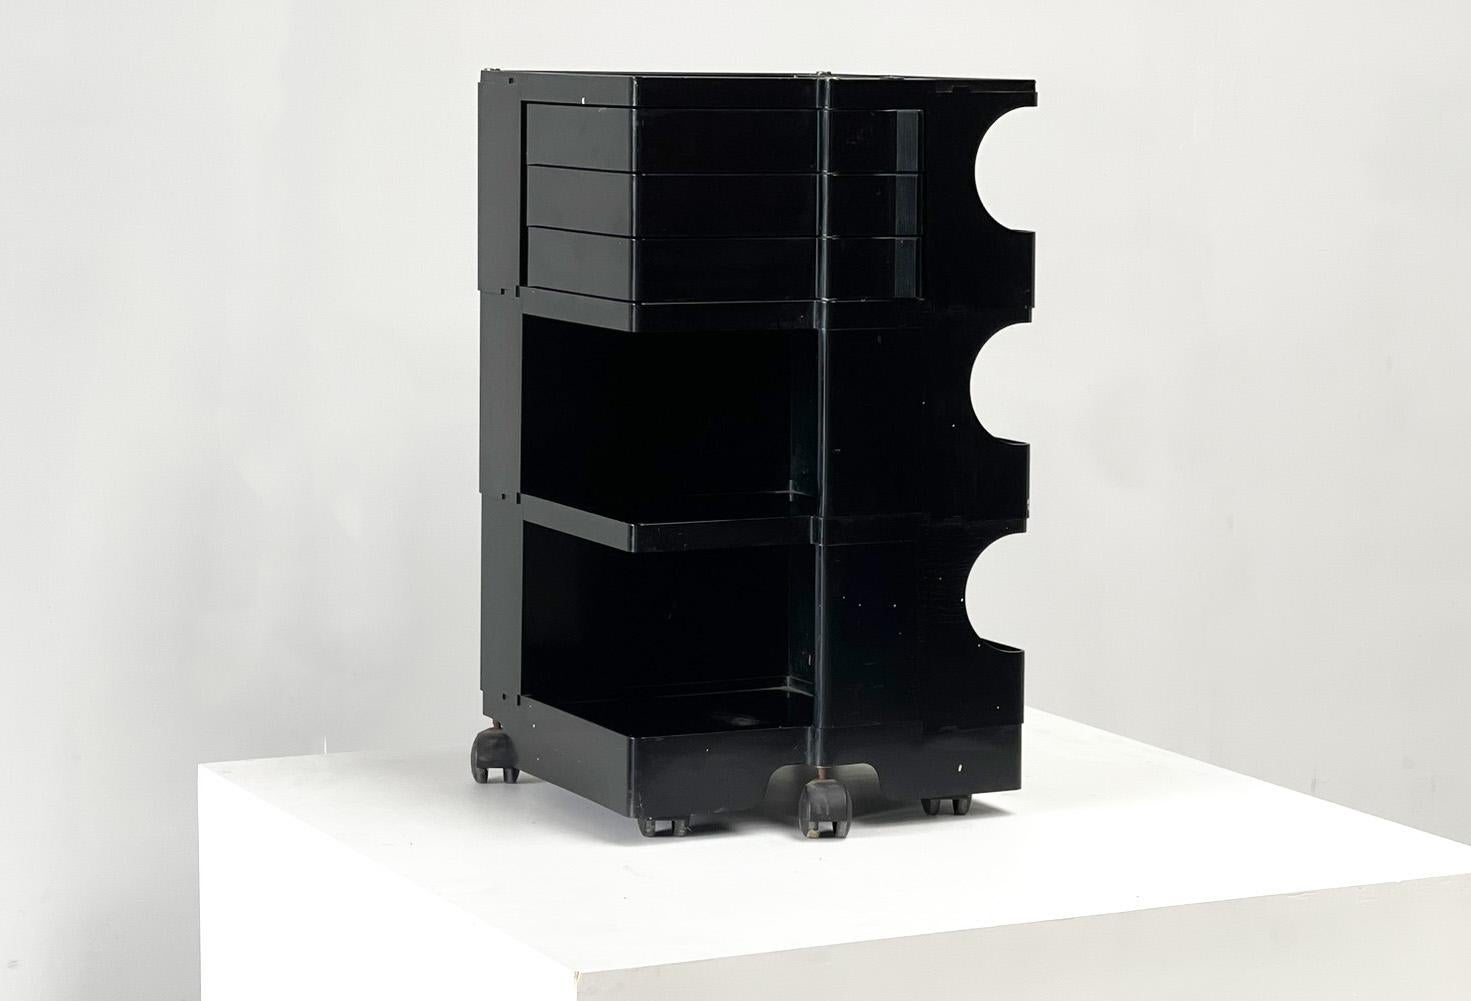 Vintage 'boby portable storage system' trolley designed by Joe Colombo and produced by Bieffeplast.

Part of the permanent collection of the MoMA in NYC

1970s - Italy

Very good condition

Dimensions:
Height: 95cm/37.40